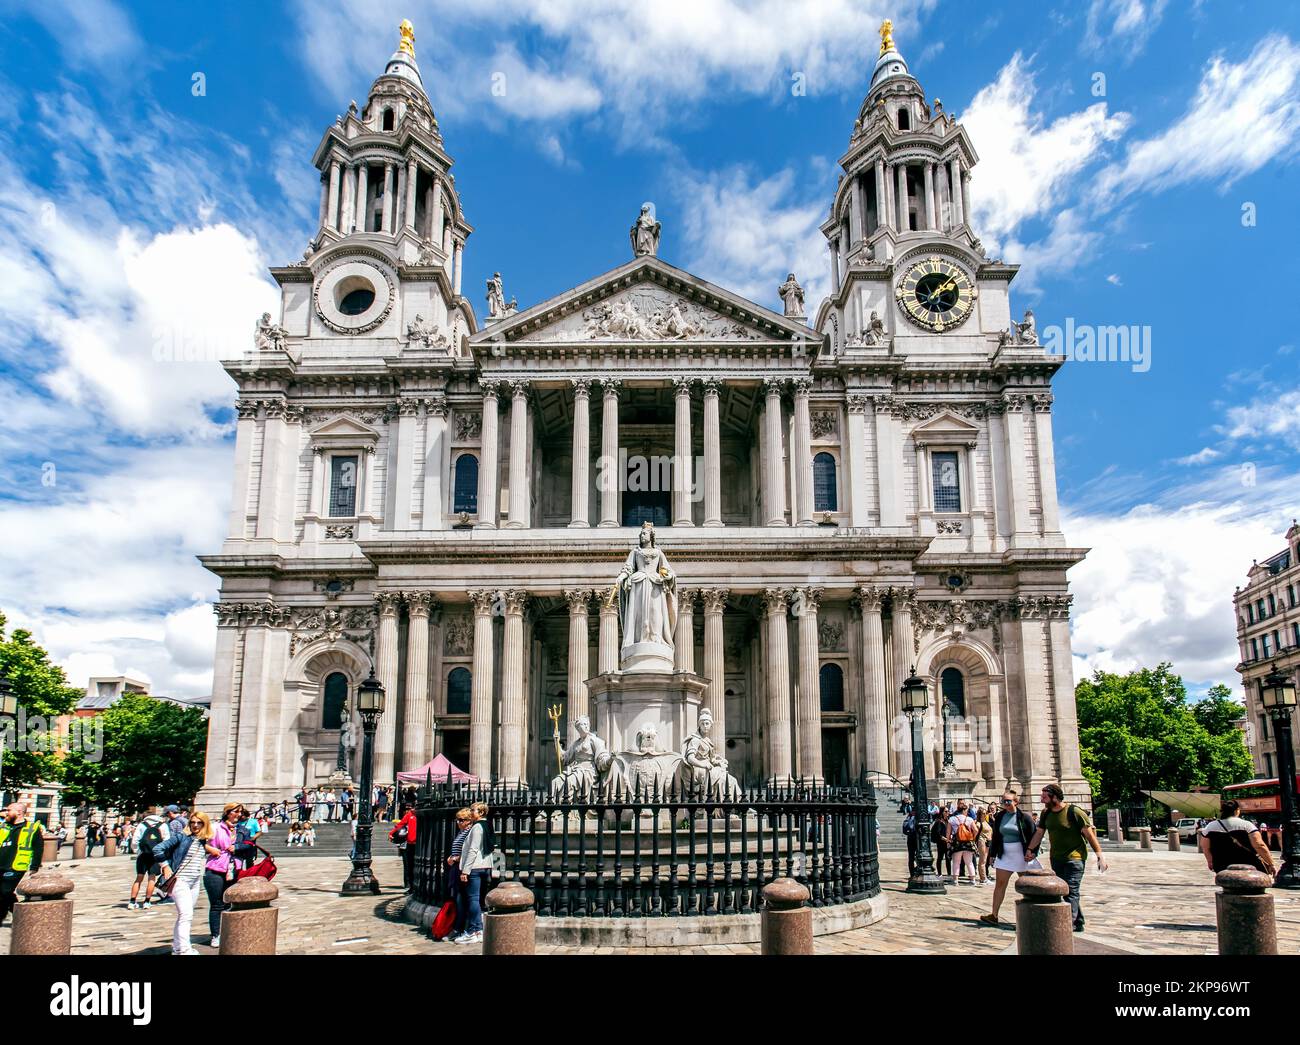 St Paul's Cathedral, Londres, City of London, Angleterre, Royaume-Uni, Grande-Bretagne, Europe Banque D'Images